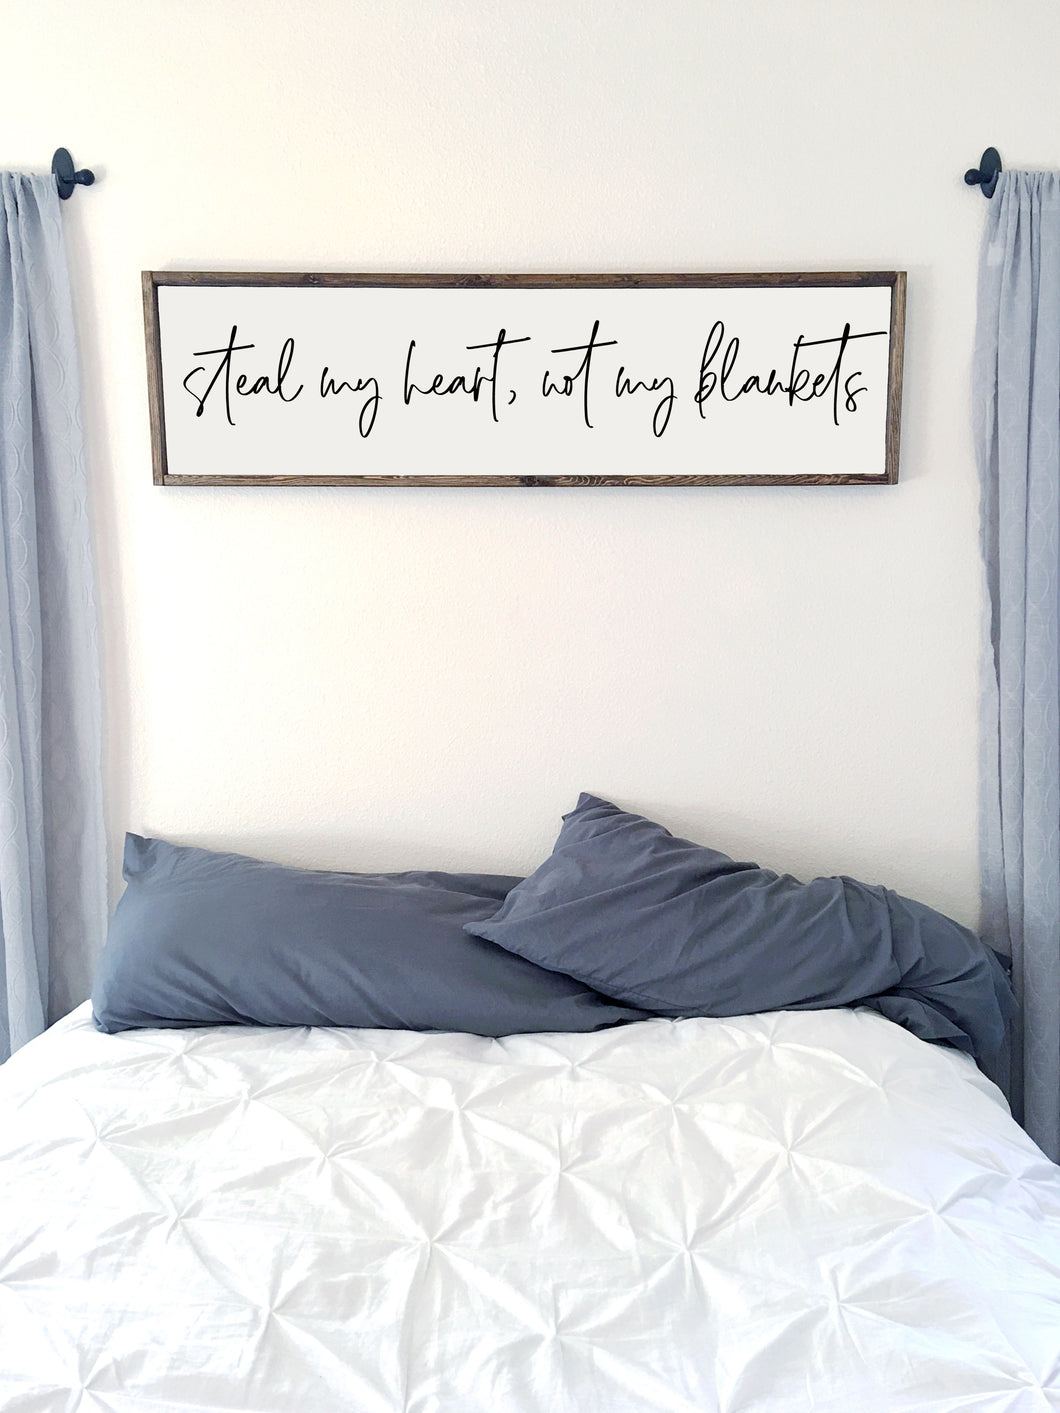 Steal my heart not my blankets | Framed wood sign